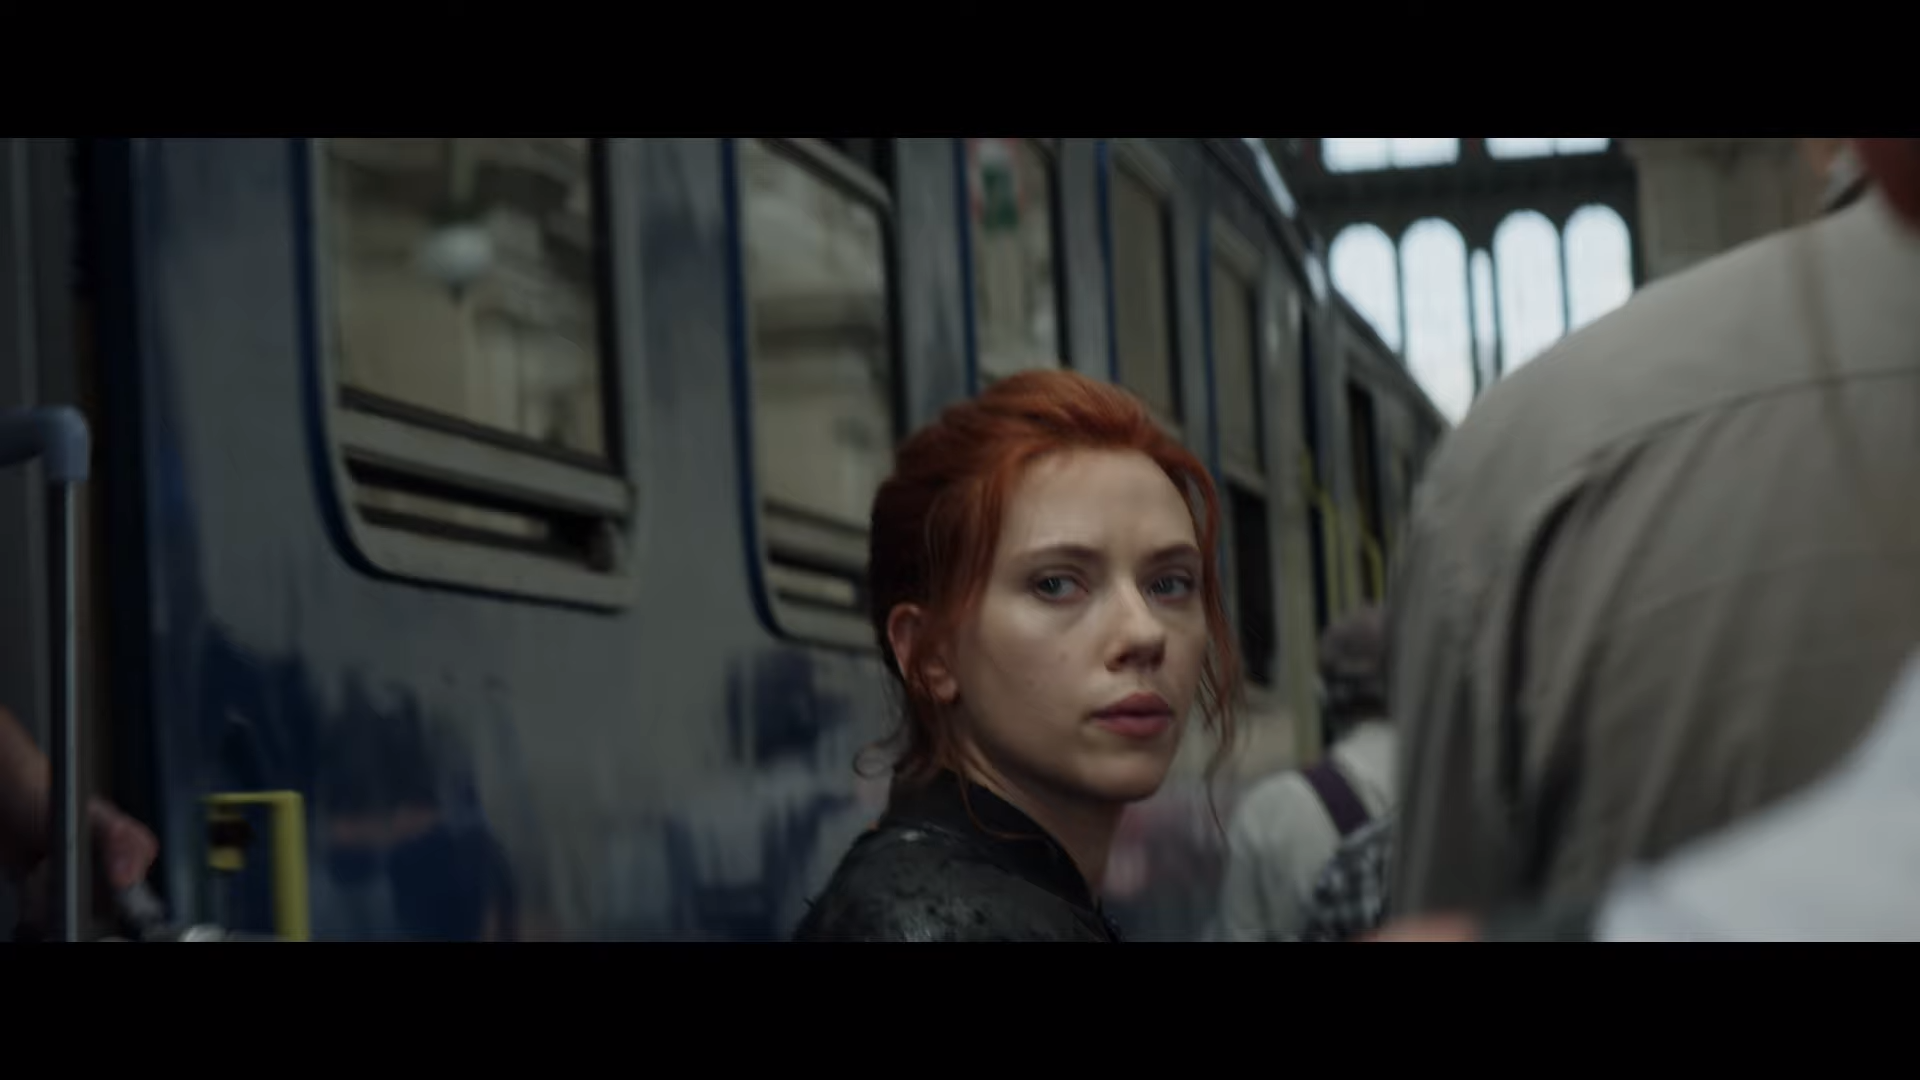 When Will The Black Widow Movie Come Out On Disney+ - 2019 movie, Avengers: Endgame, Black Widow, movie poster ... / Marvel's black widow movie will debut on disney+ and in theaters.